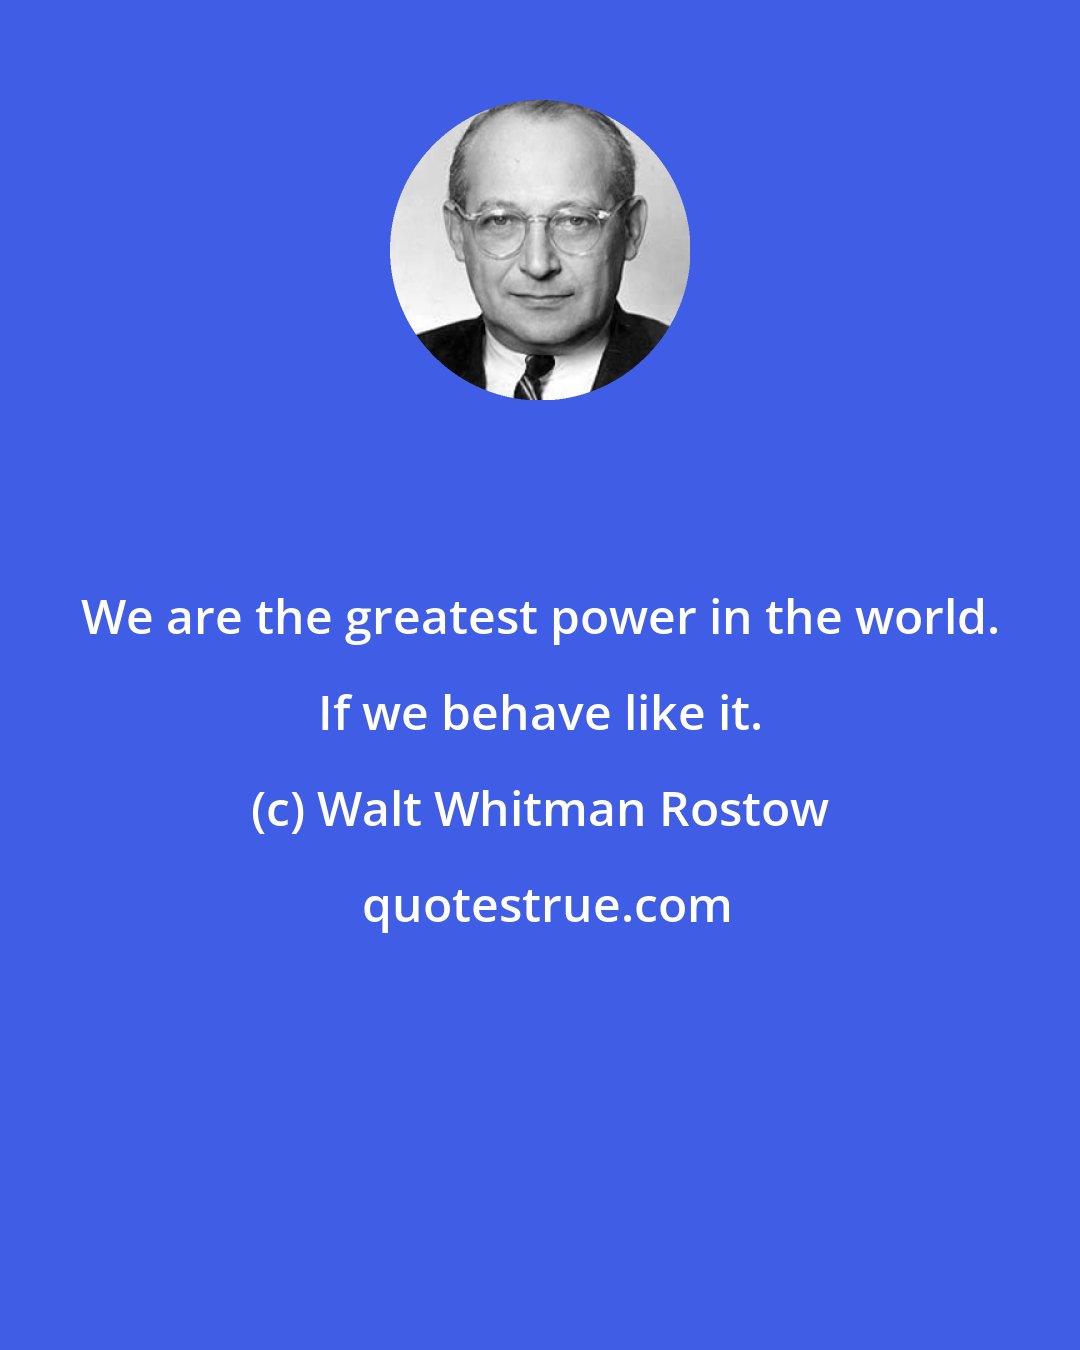 Walt Whitman Rostow: We are the greatest power in the world. If we behave like it.